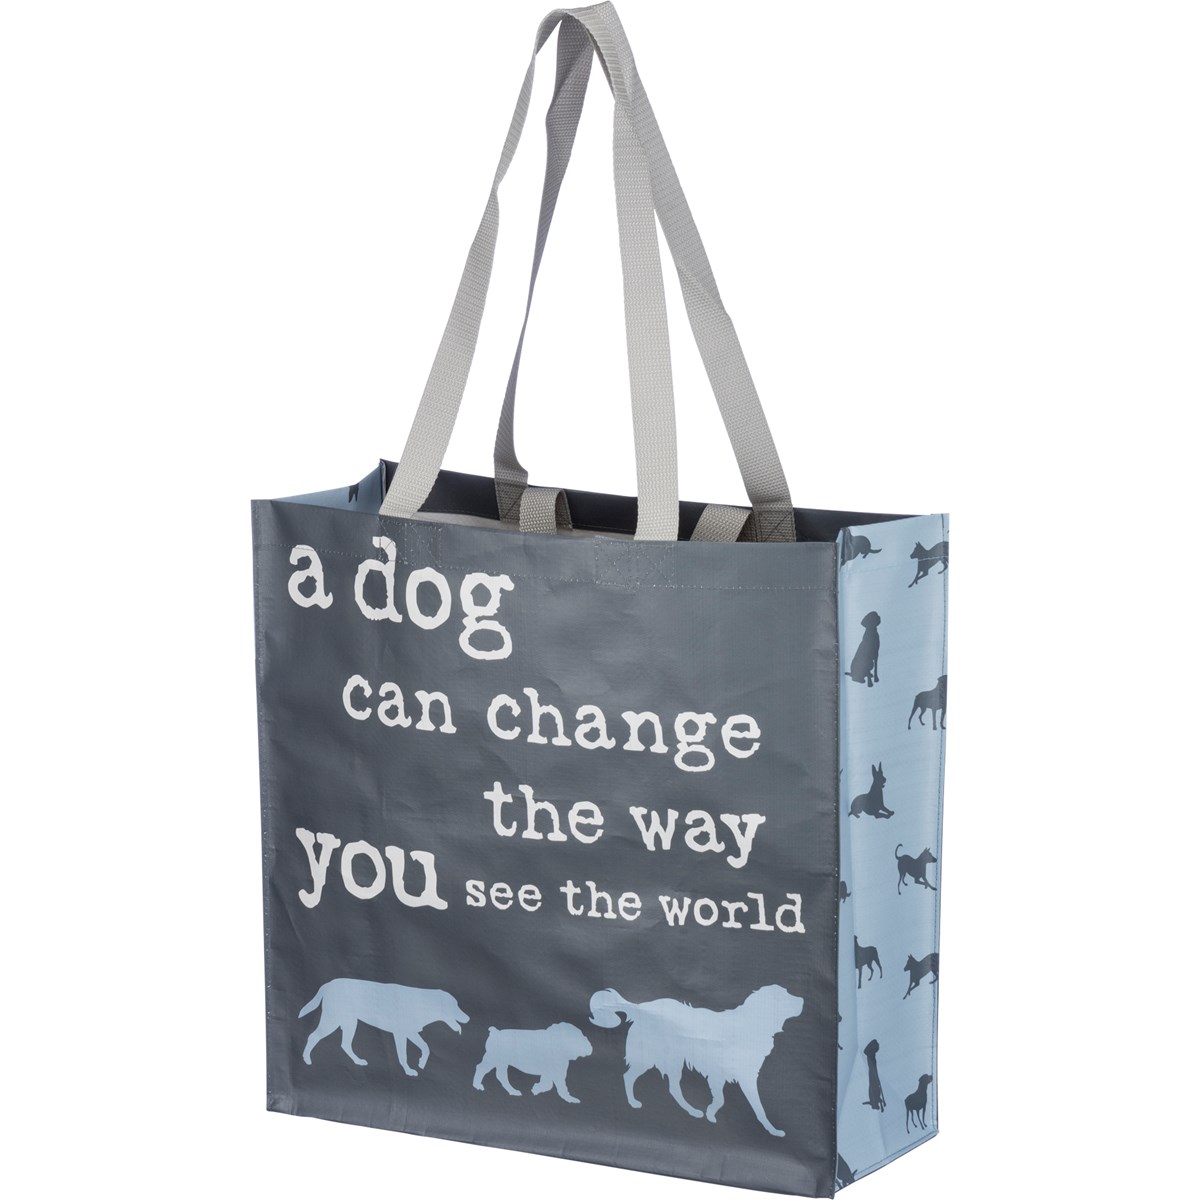 Market Tote - Dog Can Change Way You See World - 15.50" x 15.25" x 6" - Post-Consumer Material, Nylon